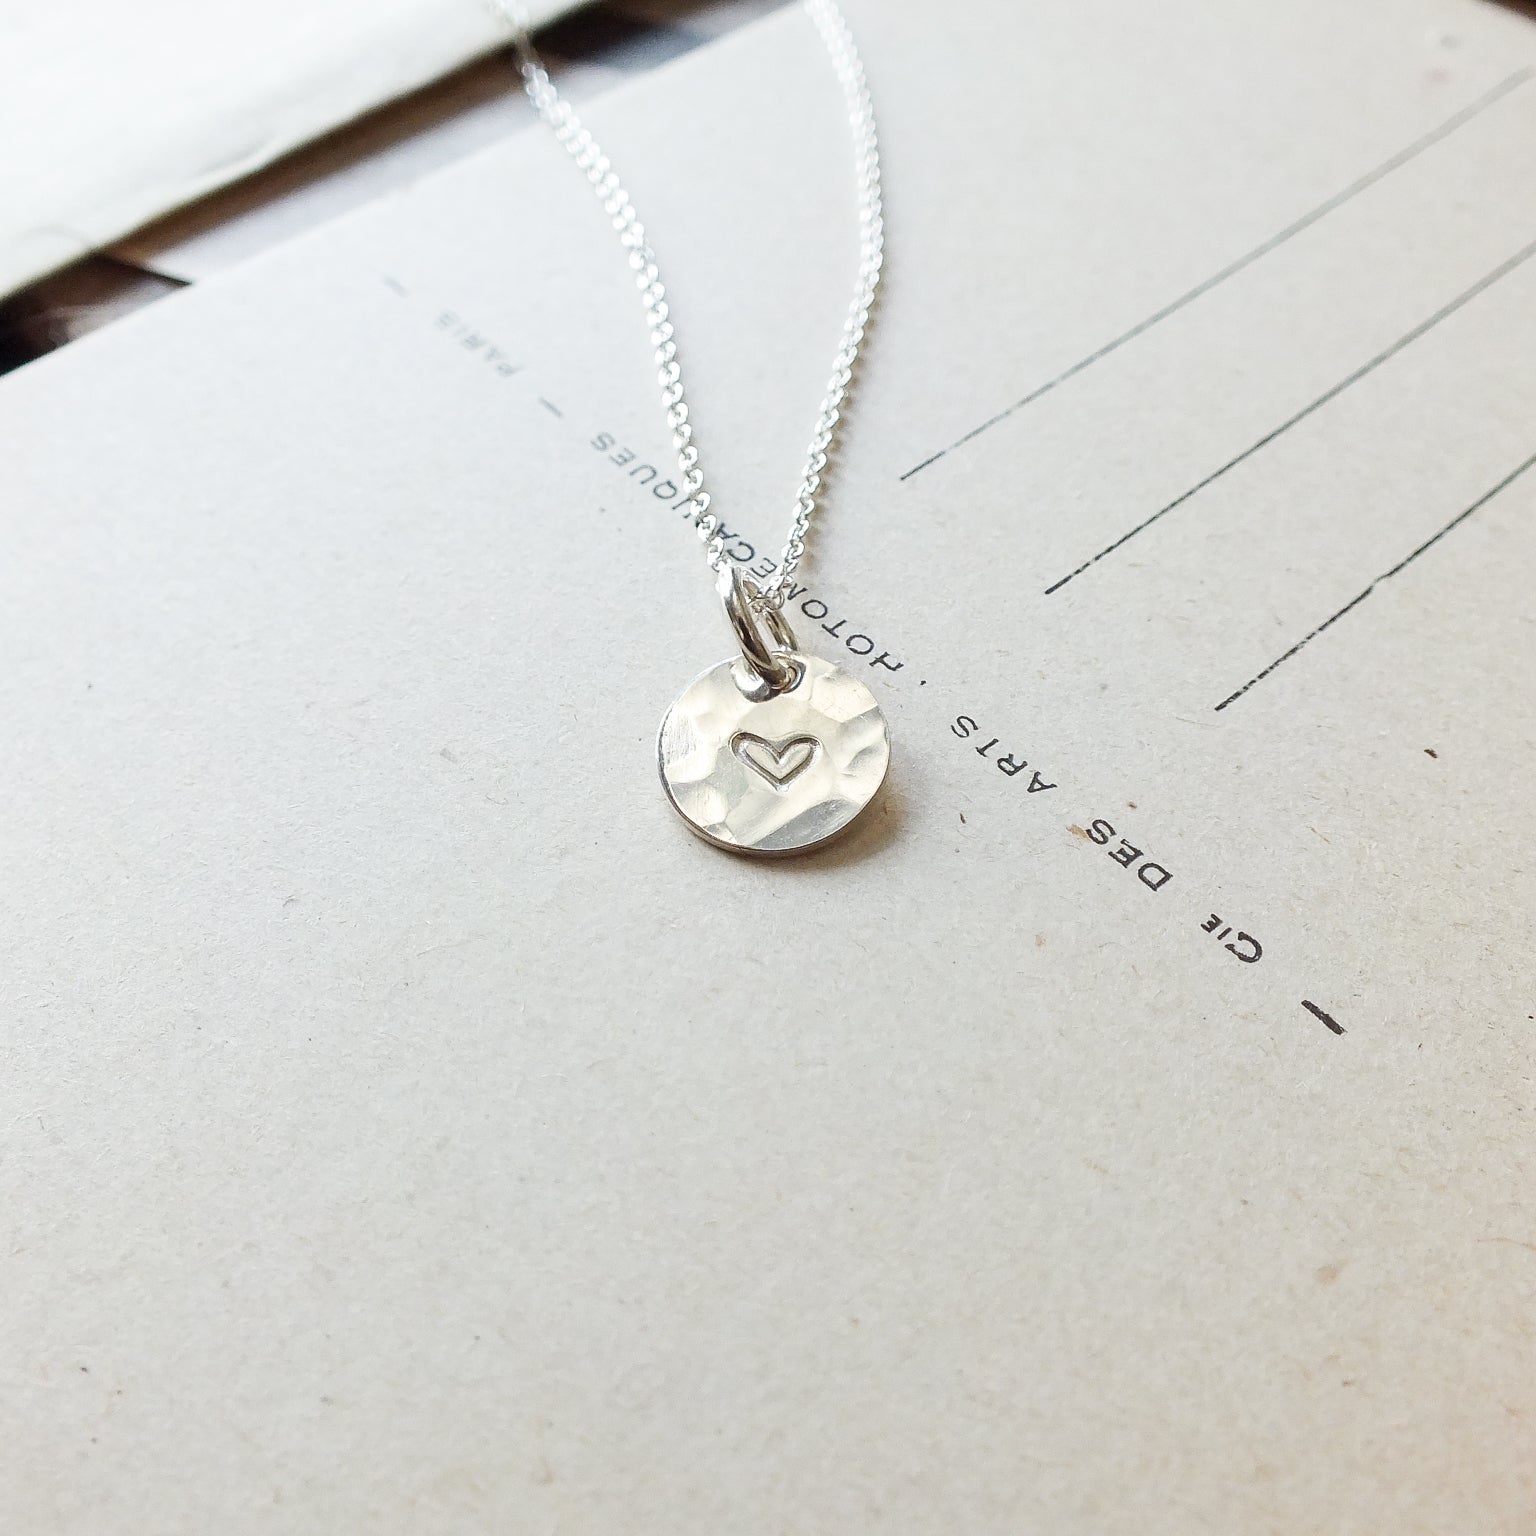 A Becoming Jewelry sterling silver Heart Necklace on a chain, resting on a piece of paper with printed text.